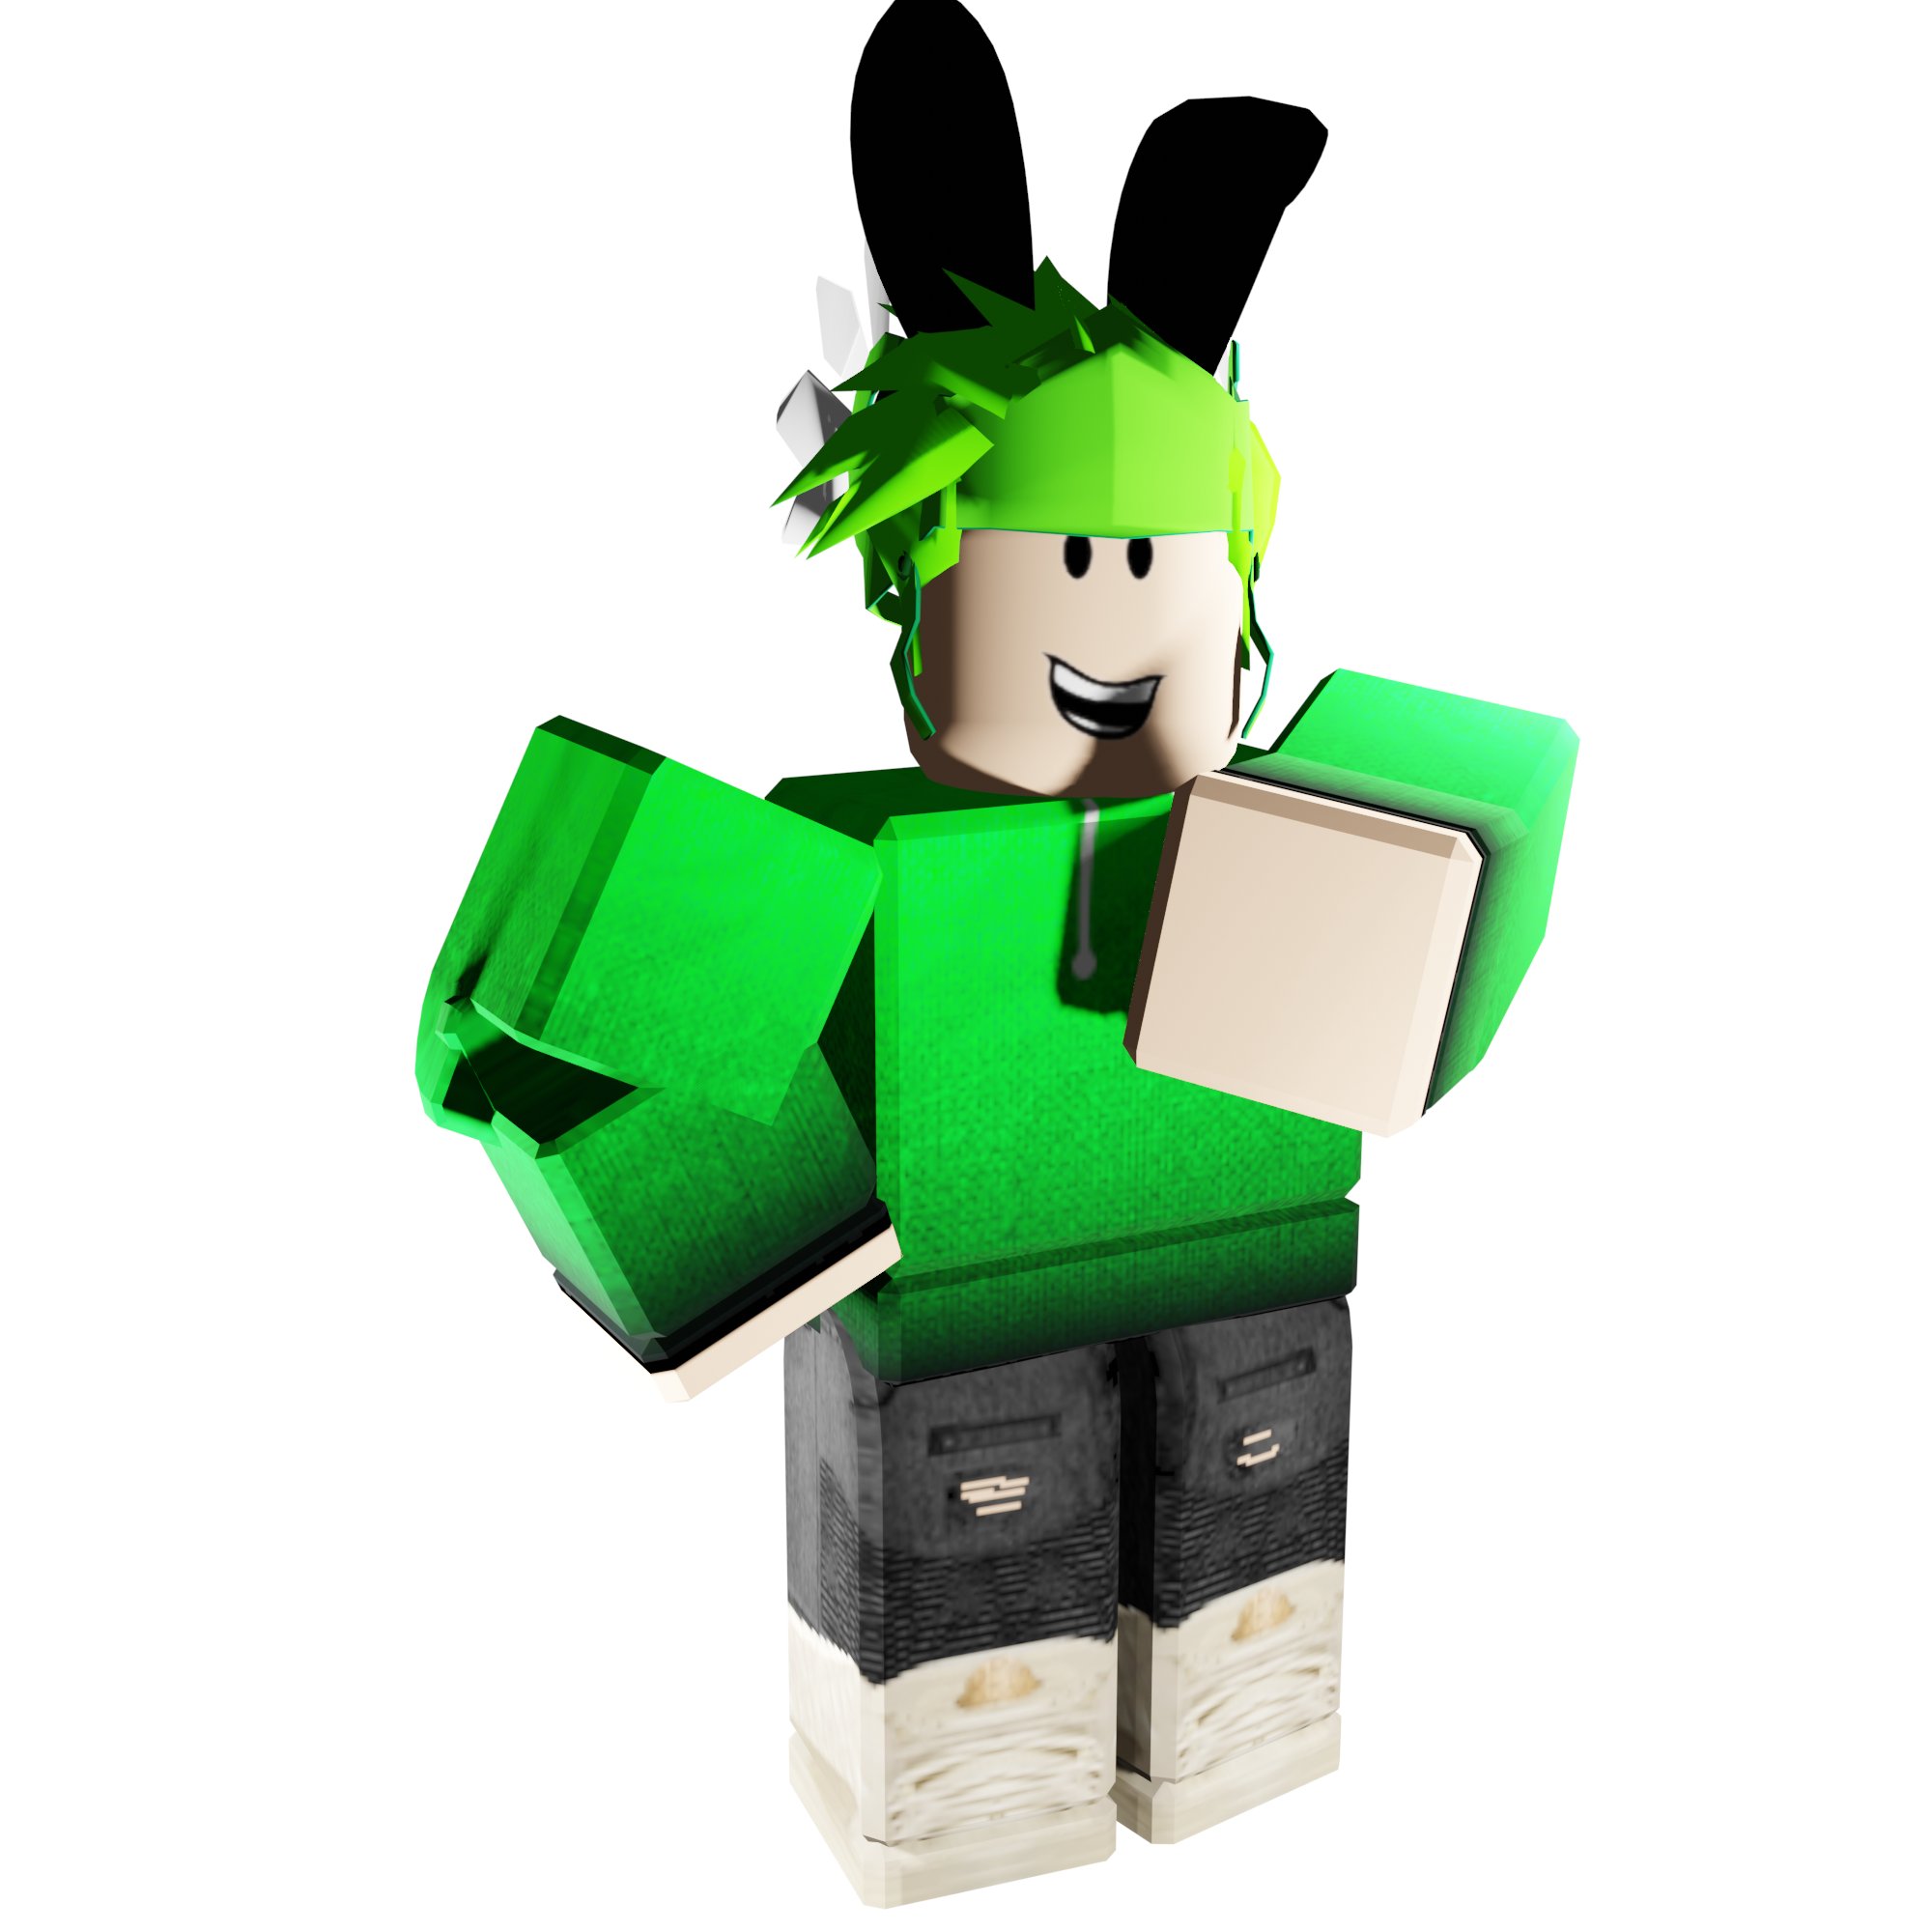 chris megill recommends show me a picture of a roblox character pic